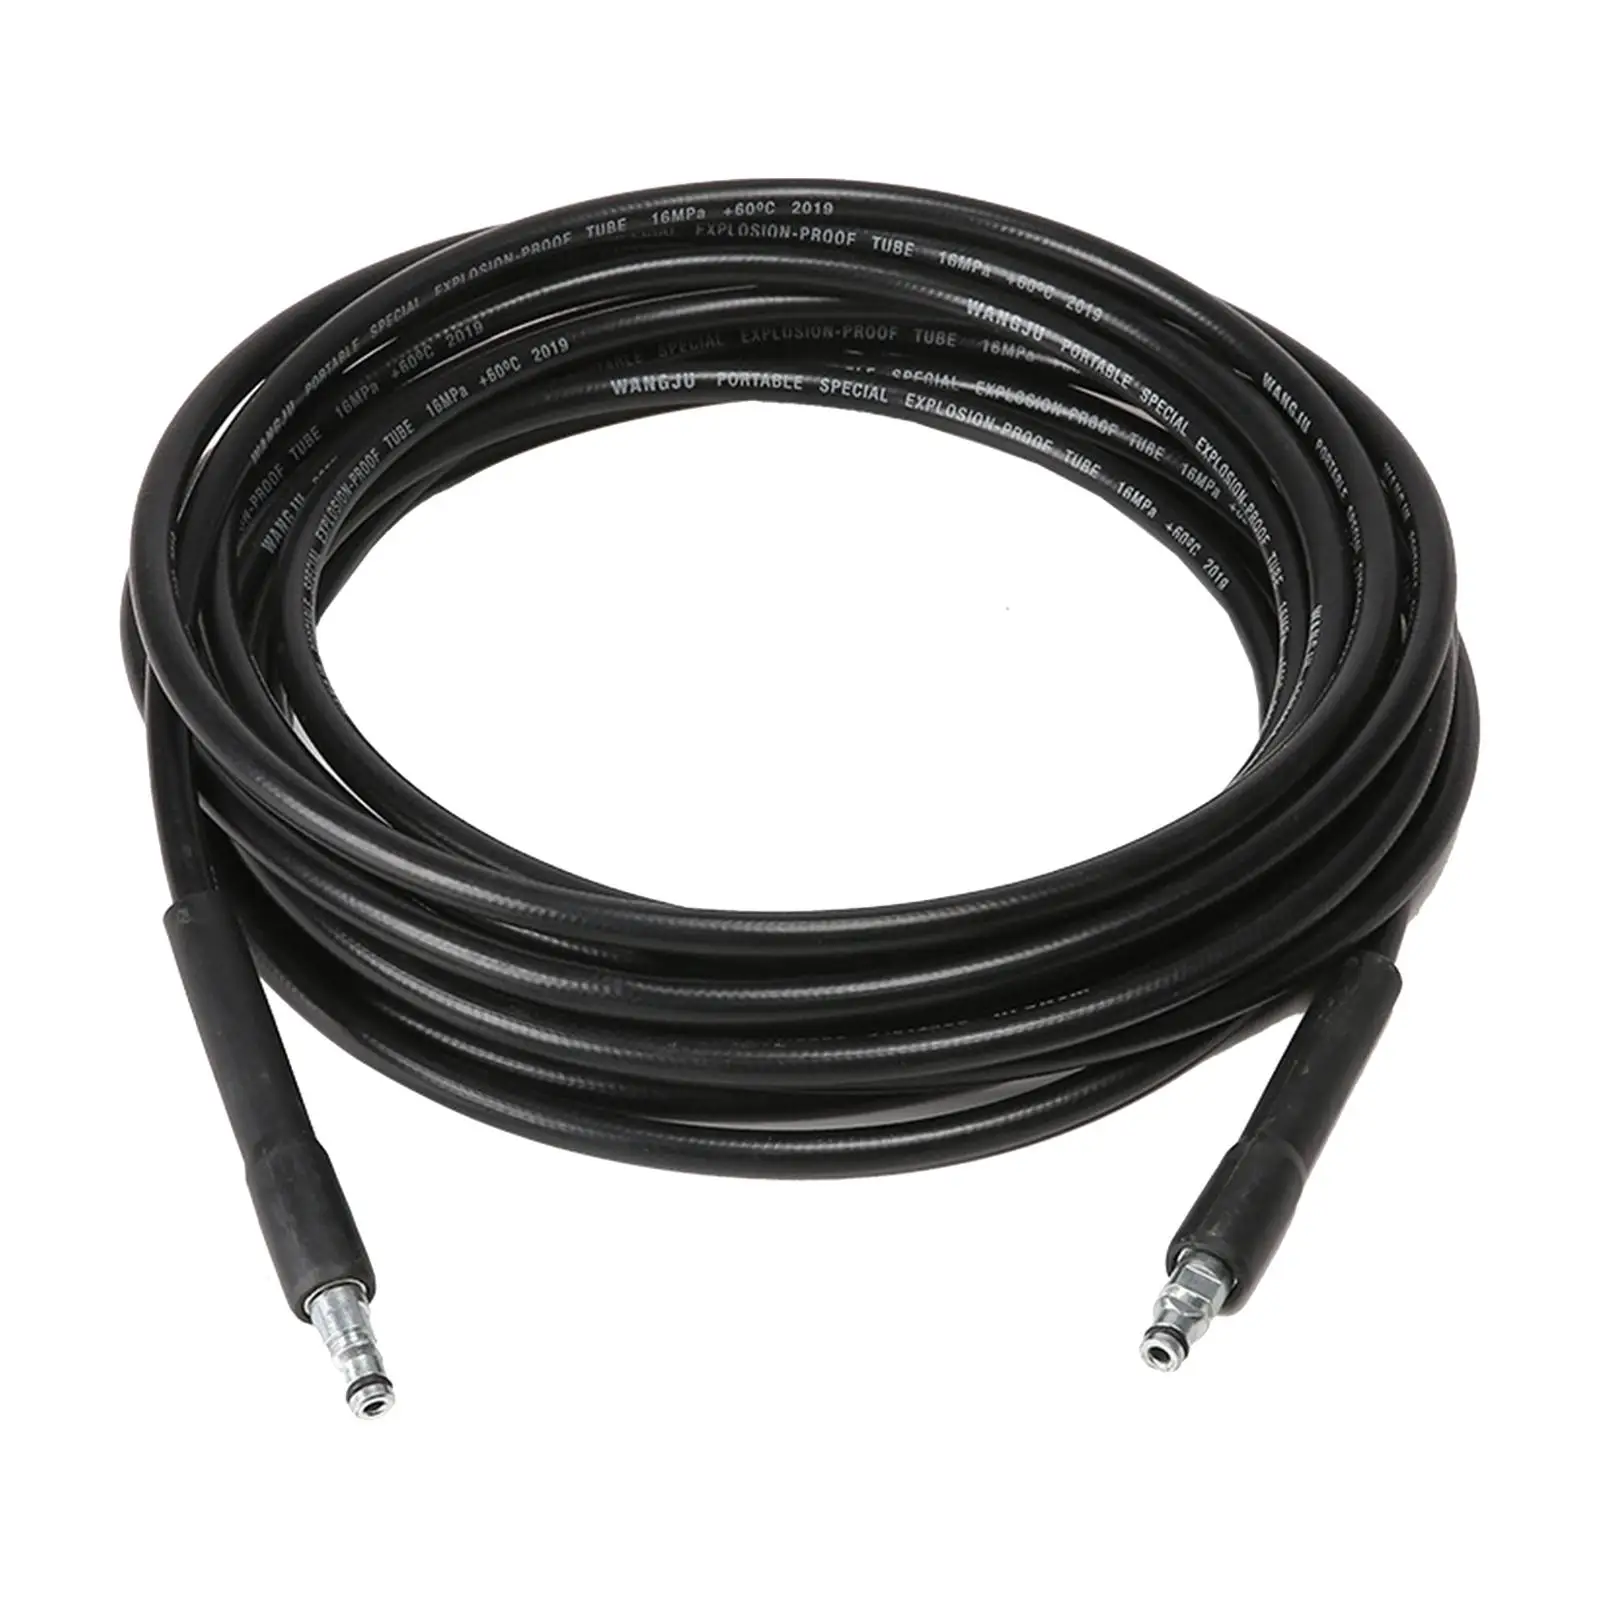 Car Washer Hose 49ft Rubber Direct Replaces Multipurpose Kink Resistant Accs Universal Heavy Duty Flexible Pressure Washer Hose